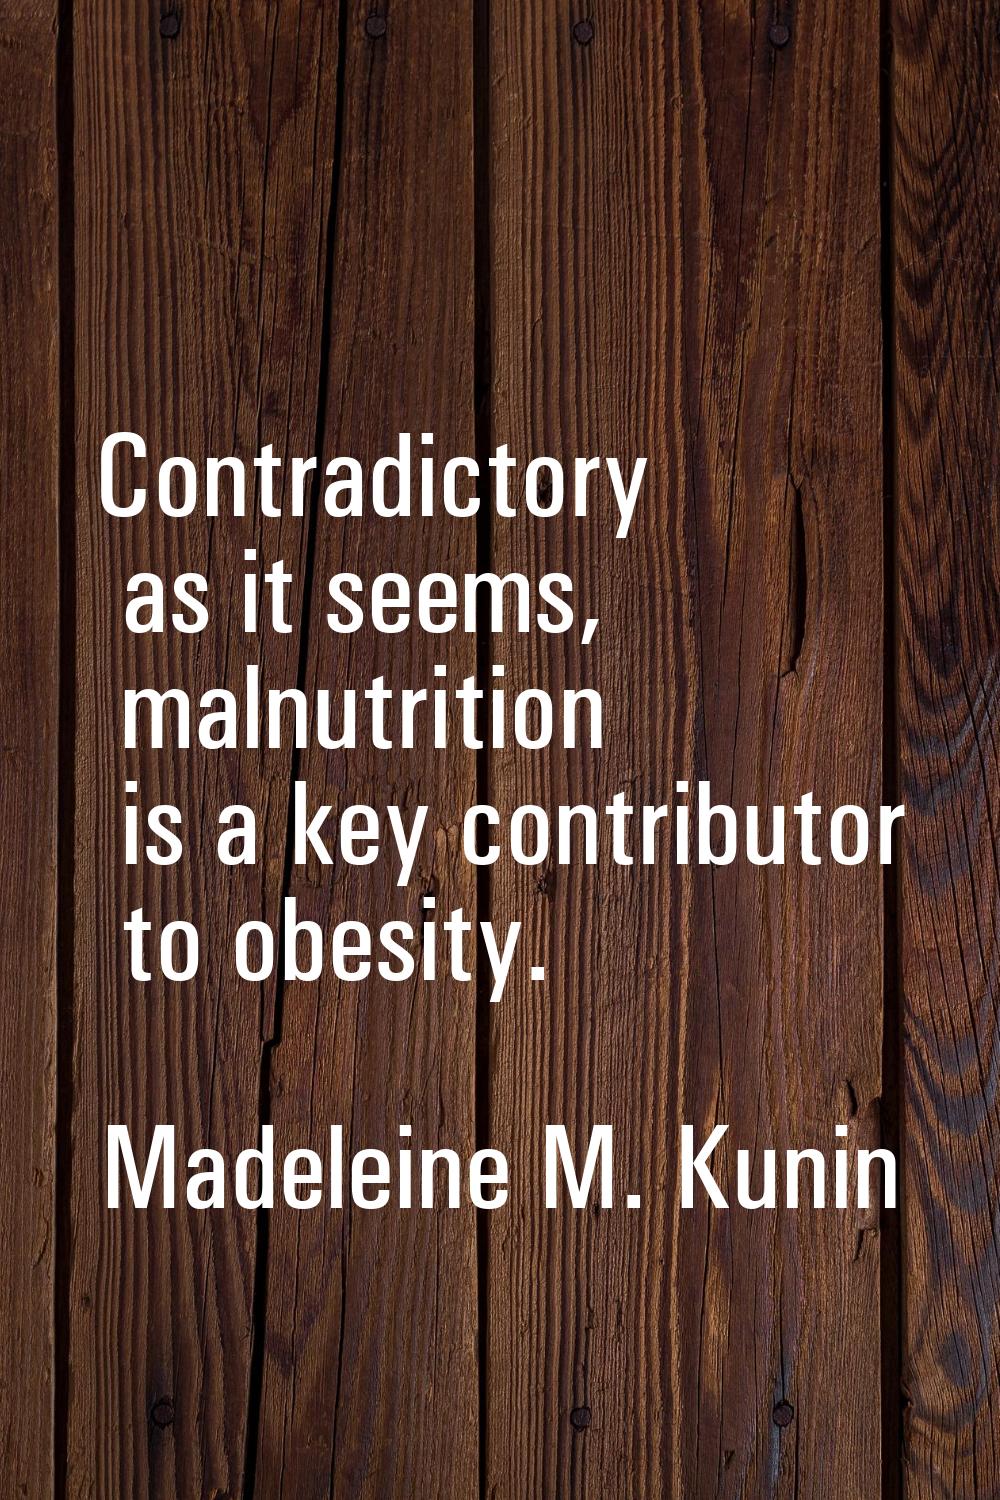 Contradictory as it seems, malnutrition is a key contributor to obesity.